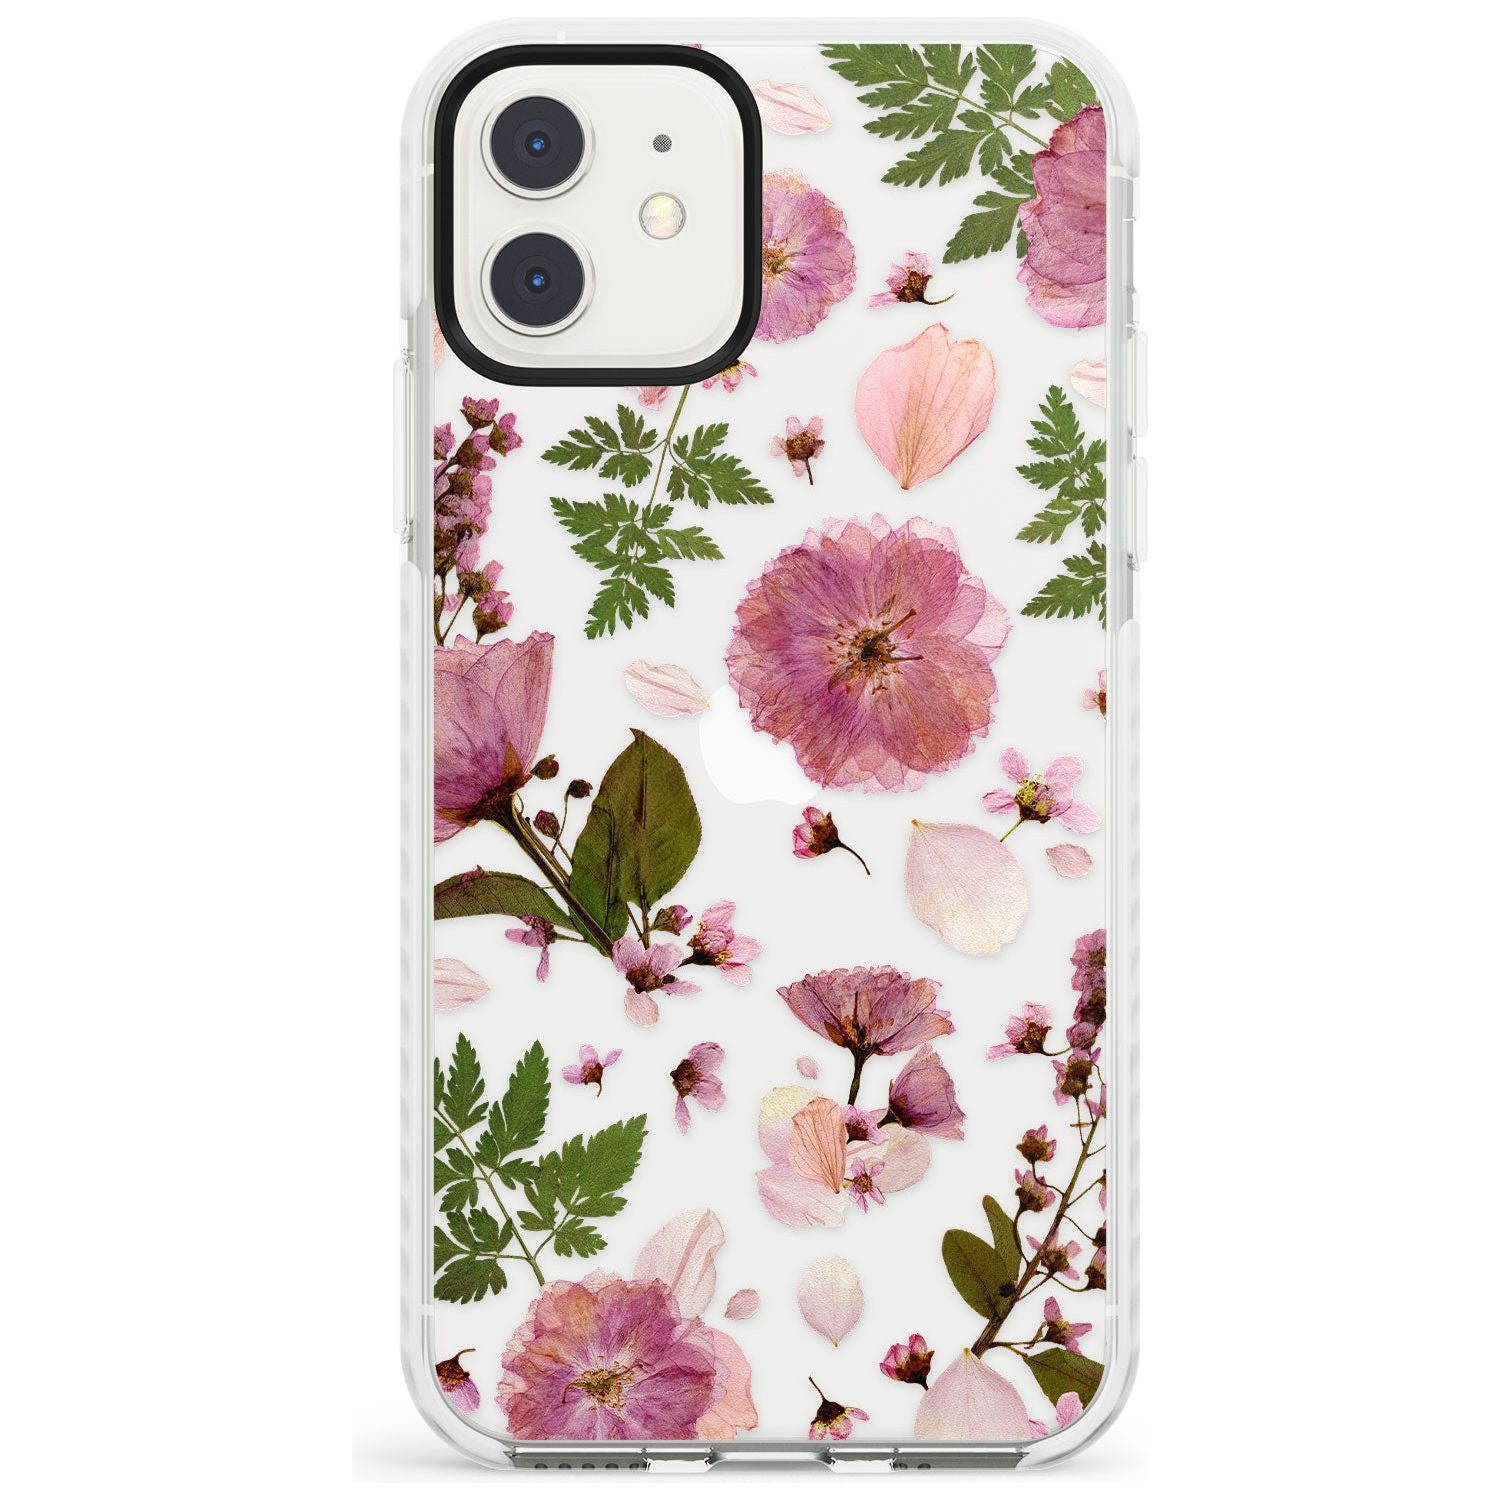 Natural Arrangement of Flowers & Leaves Design Impact Phone Case for iPhone 11